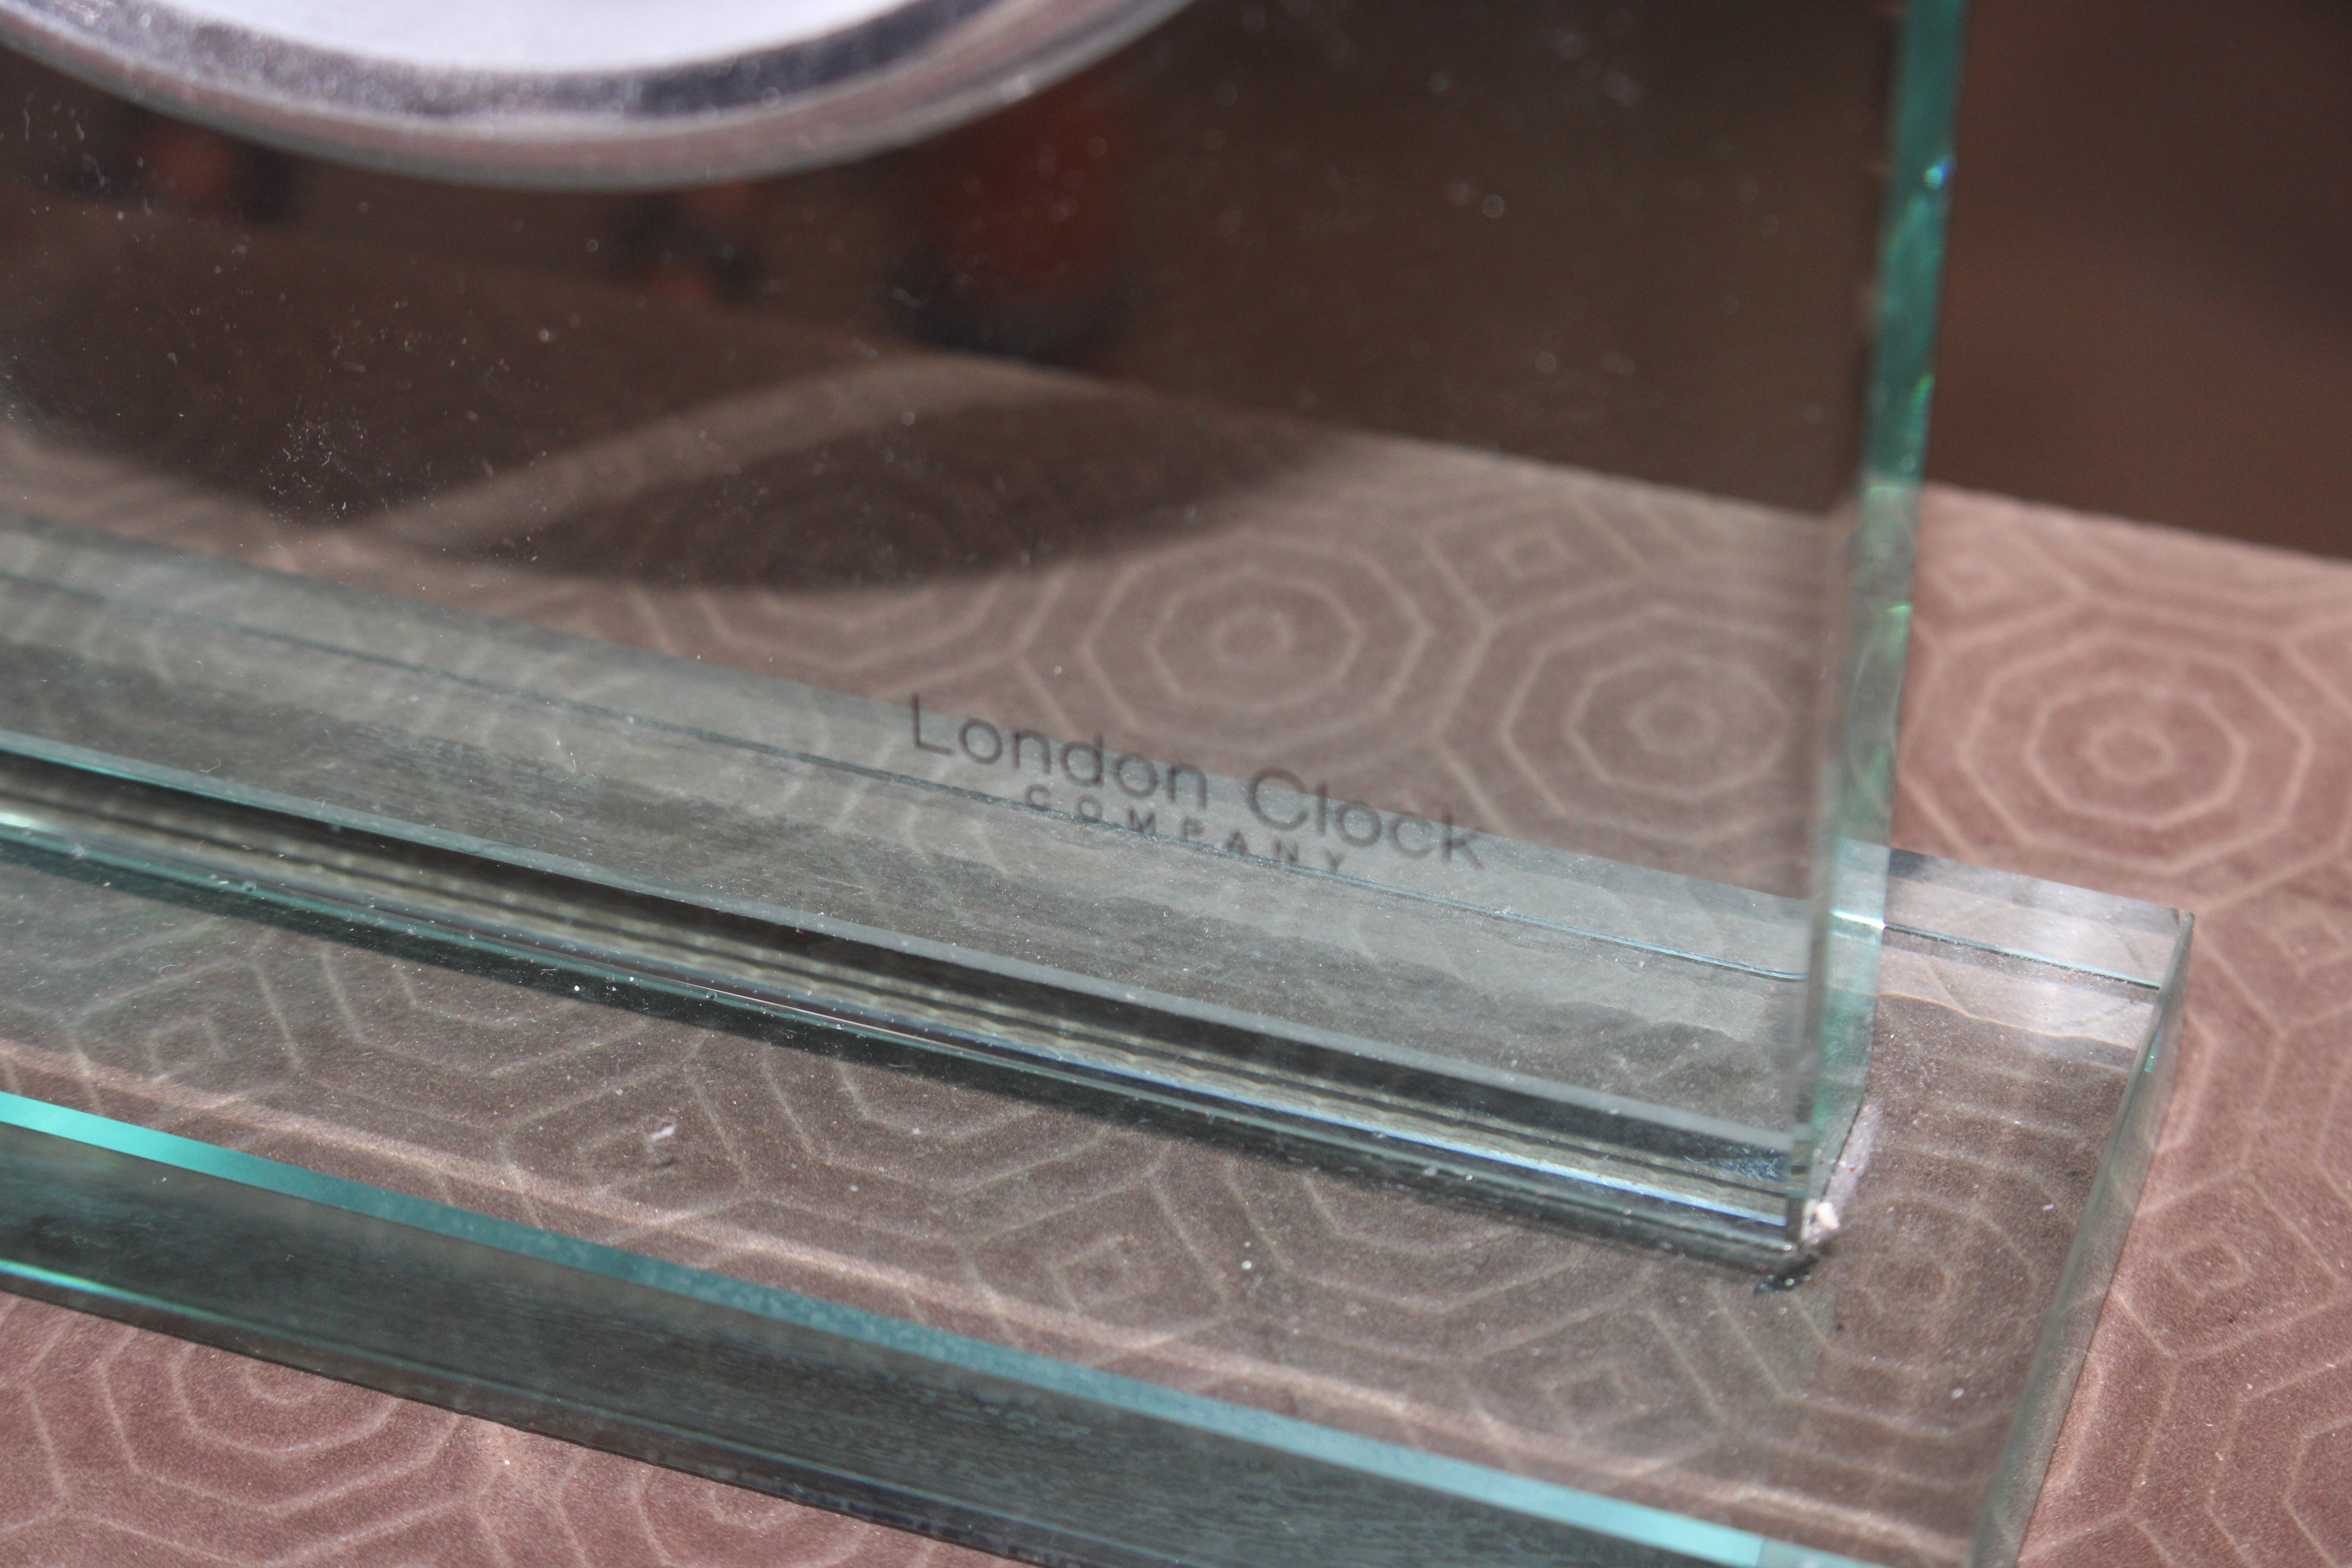 A London Clock Co. glass cased mantel clock - Image 3 of 3